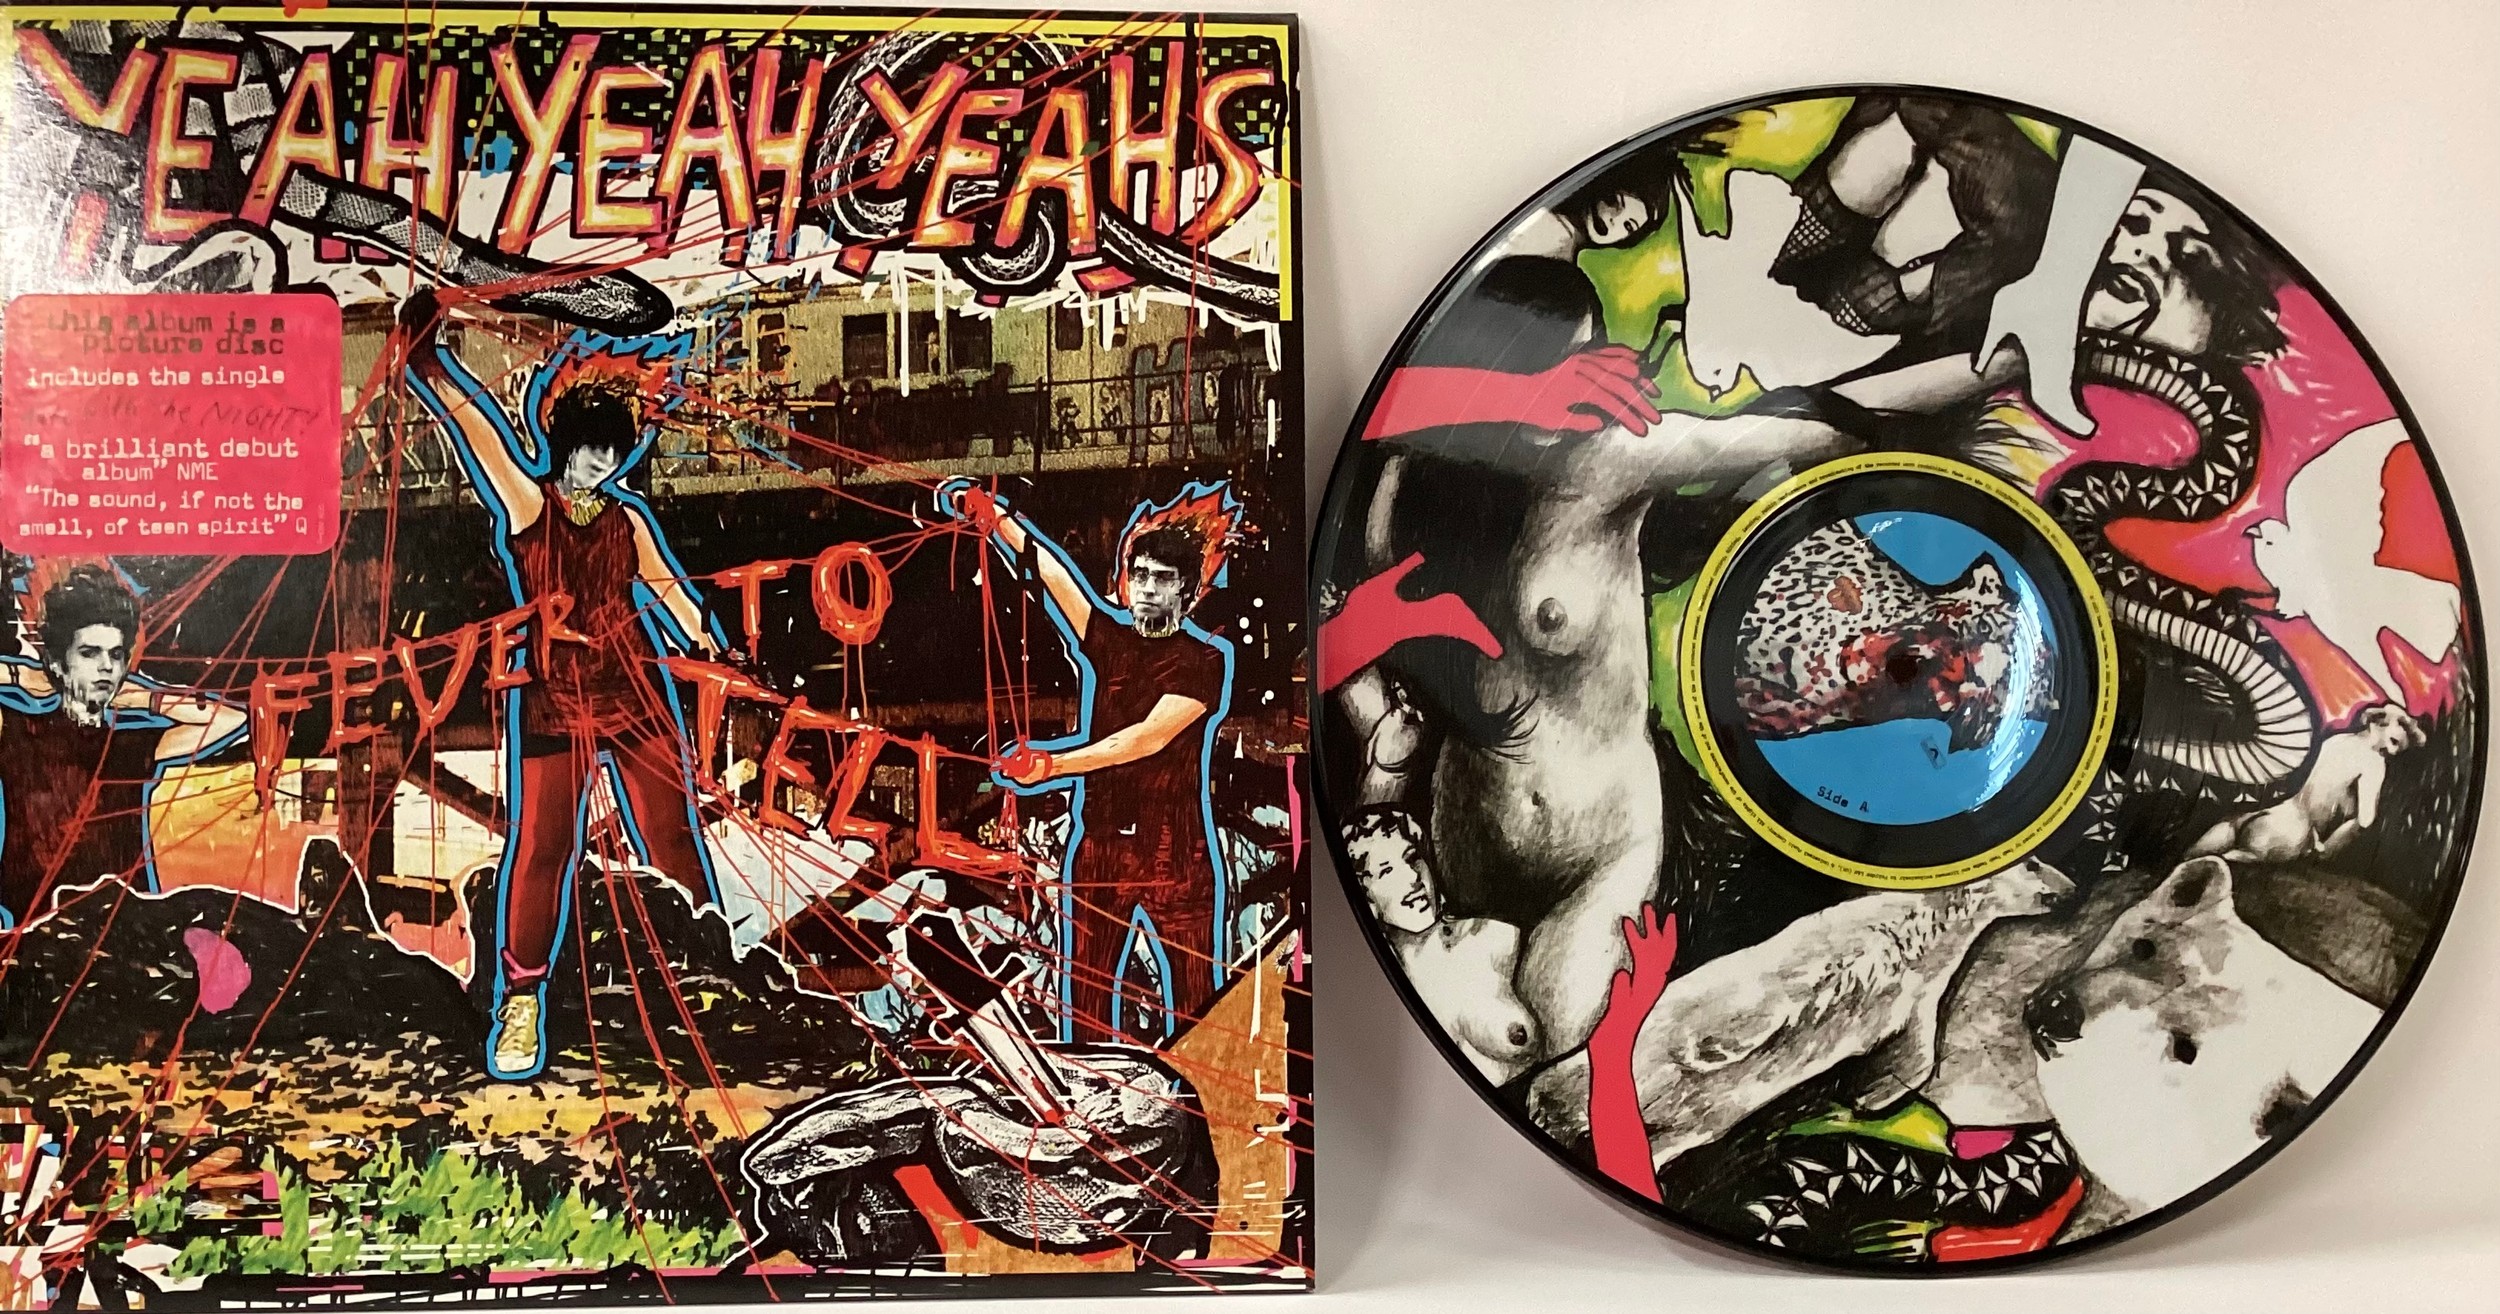 YEAH YEAH YEAH'S - FEVER TO TELL PICTURE DISC VINYL LP. Here from 2003 on Polydor Records Made in